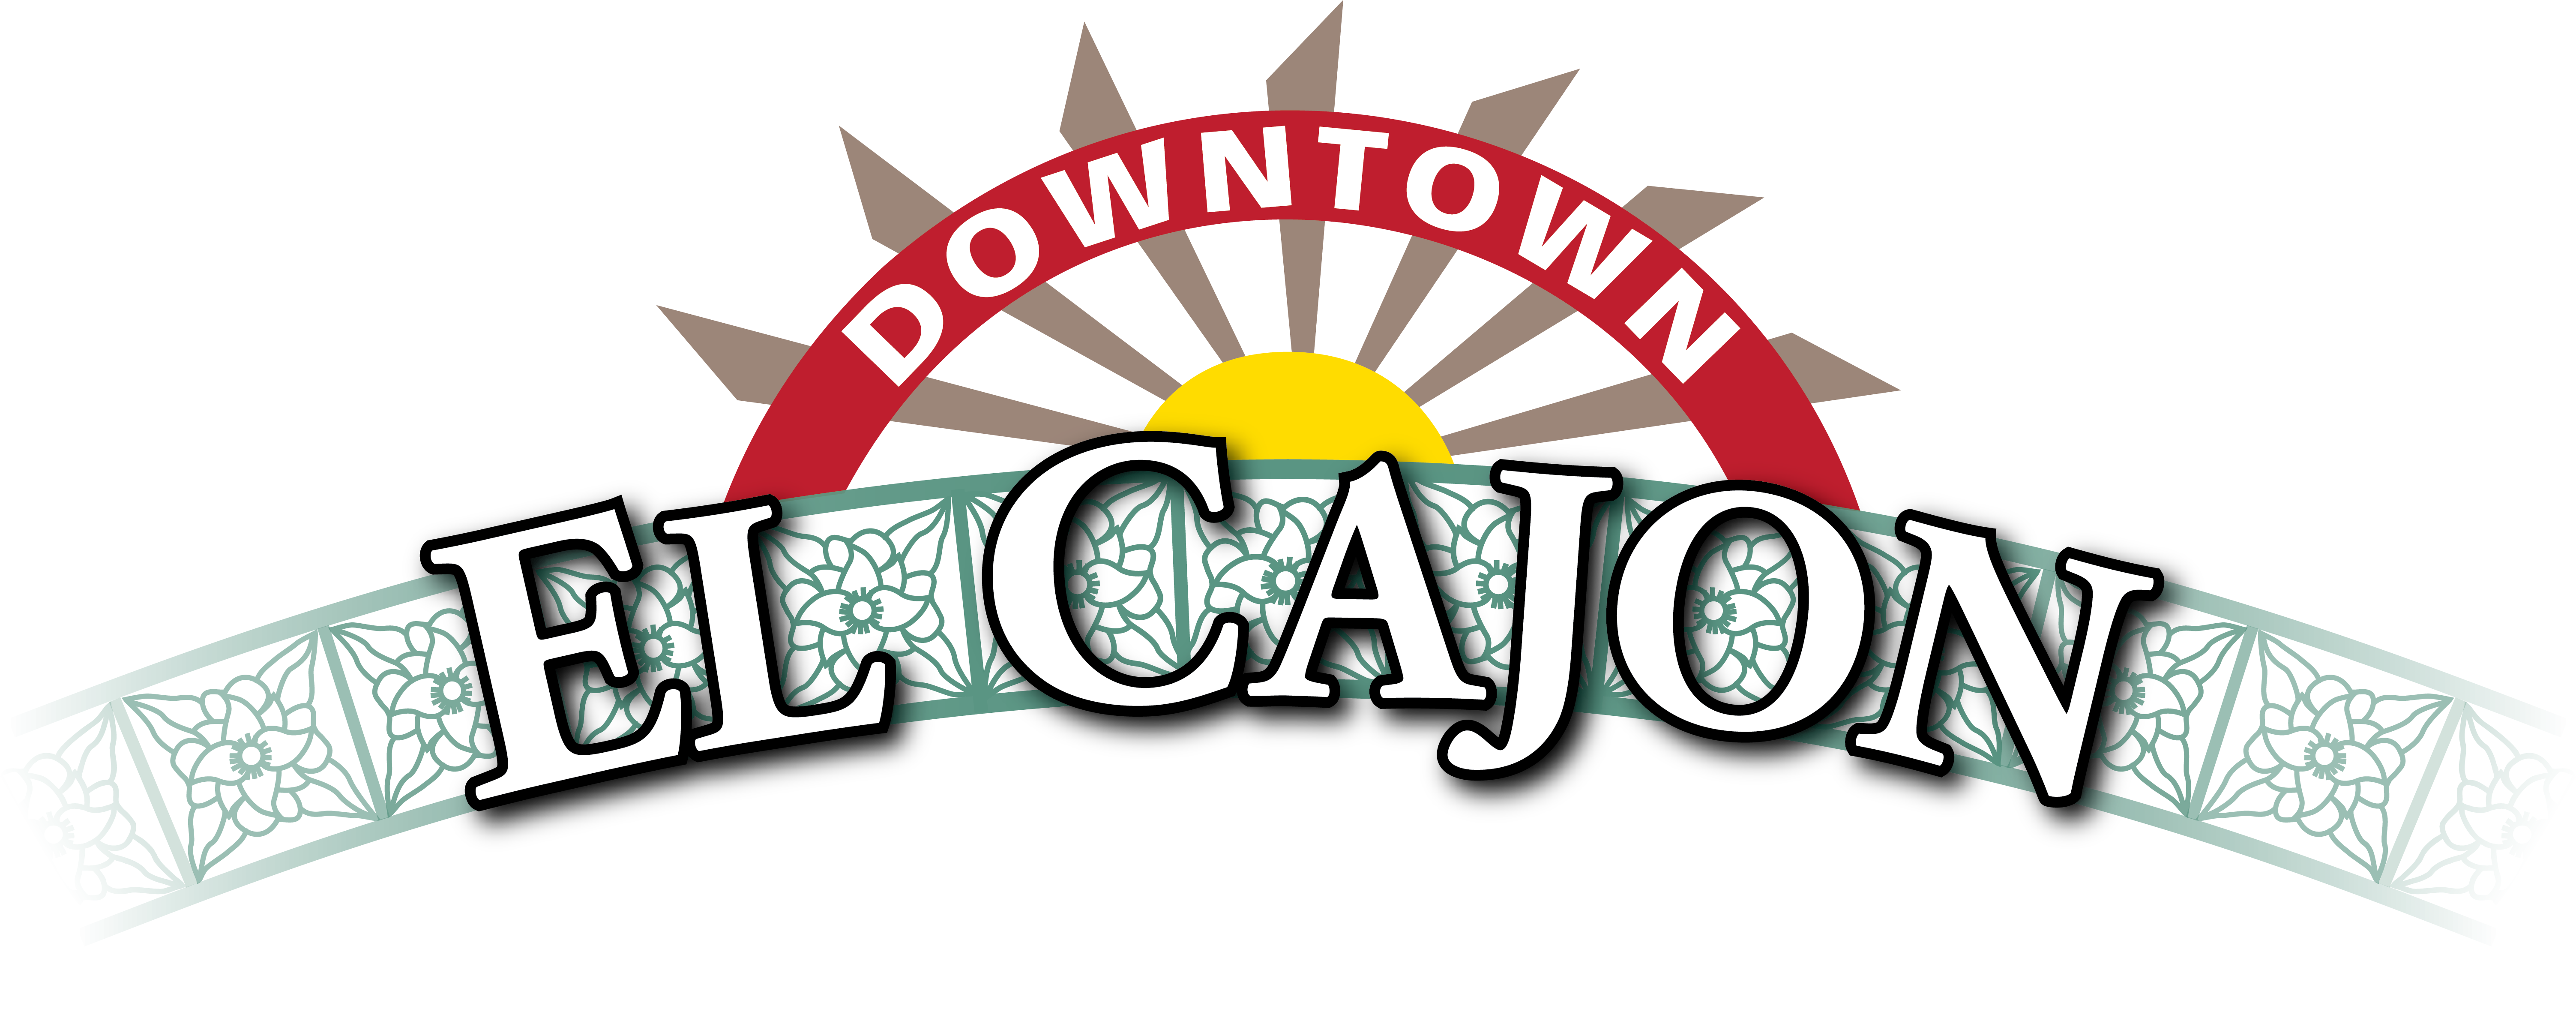 community clipart downtown